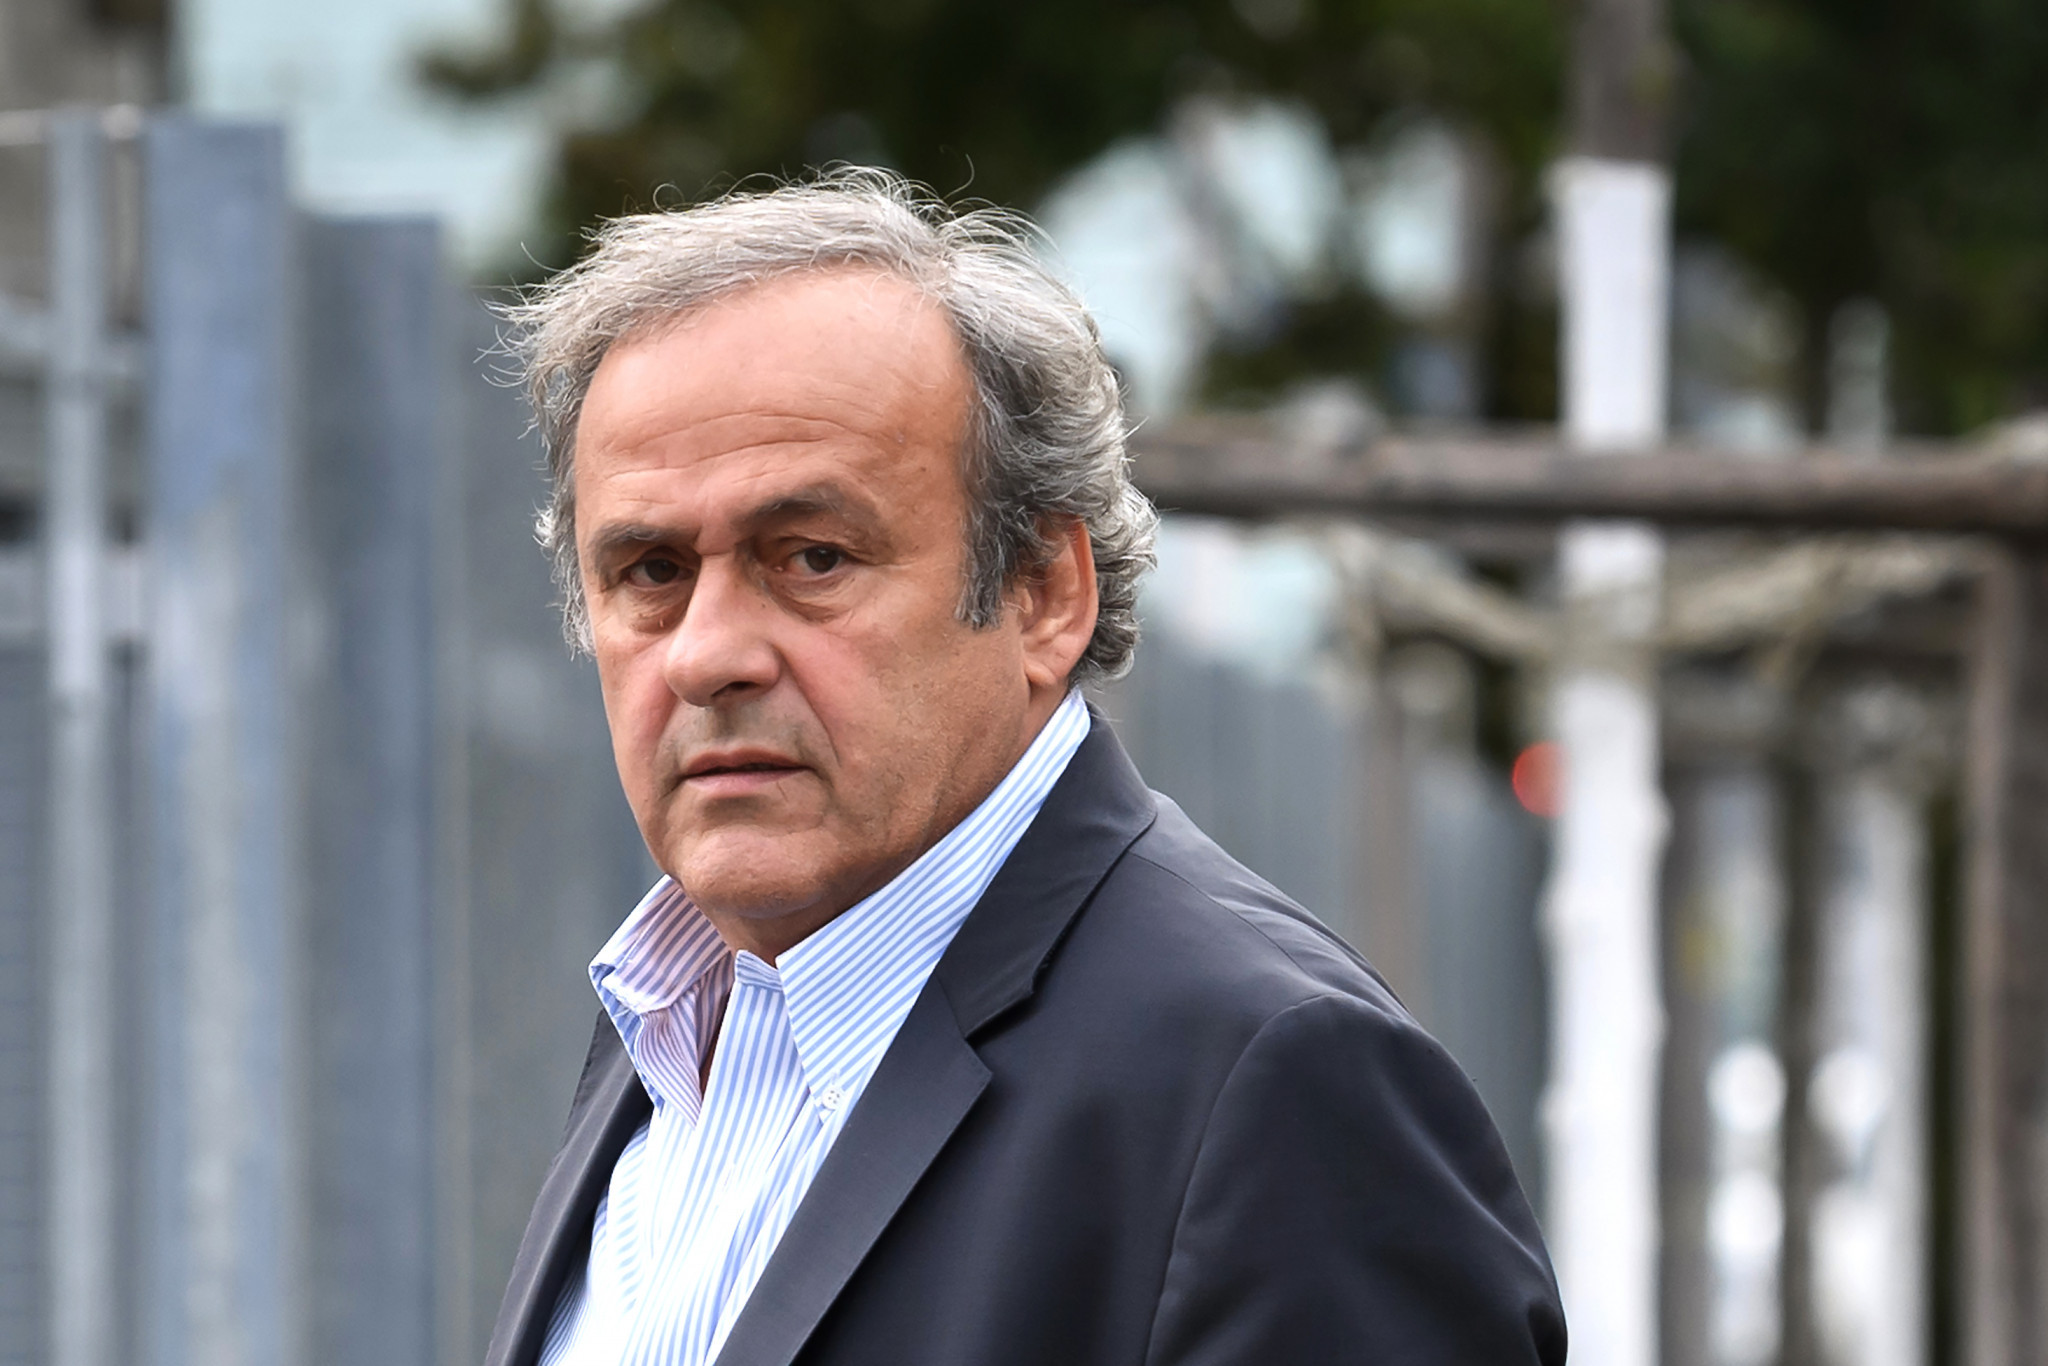 Michel Platini claimed he is "fighting" to clear his name from allegations of corruption ©Getty Images